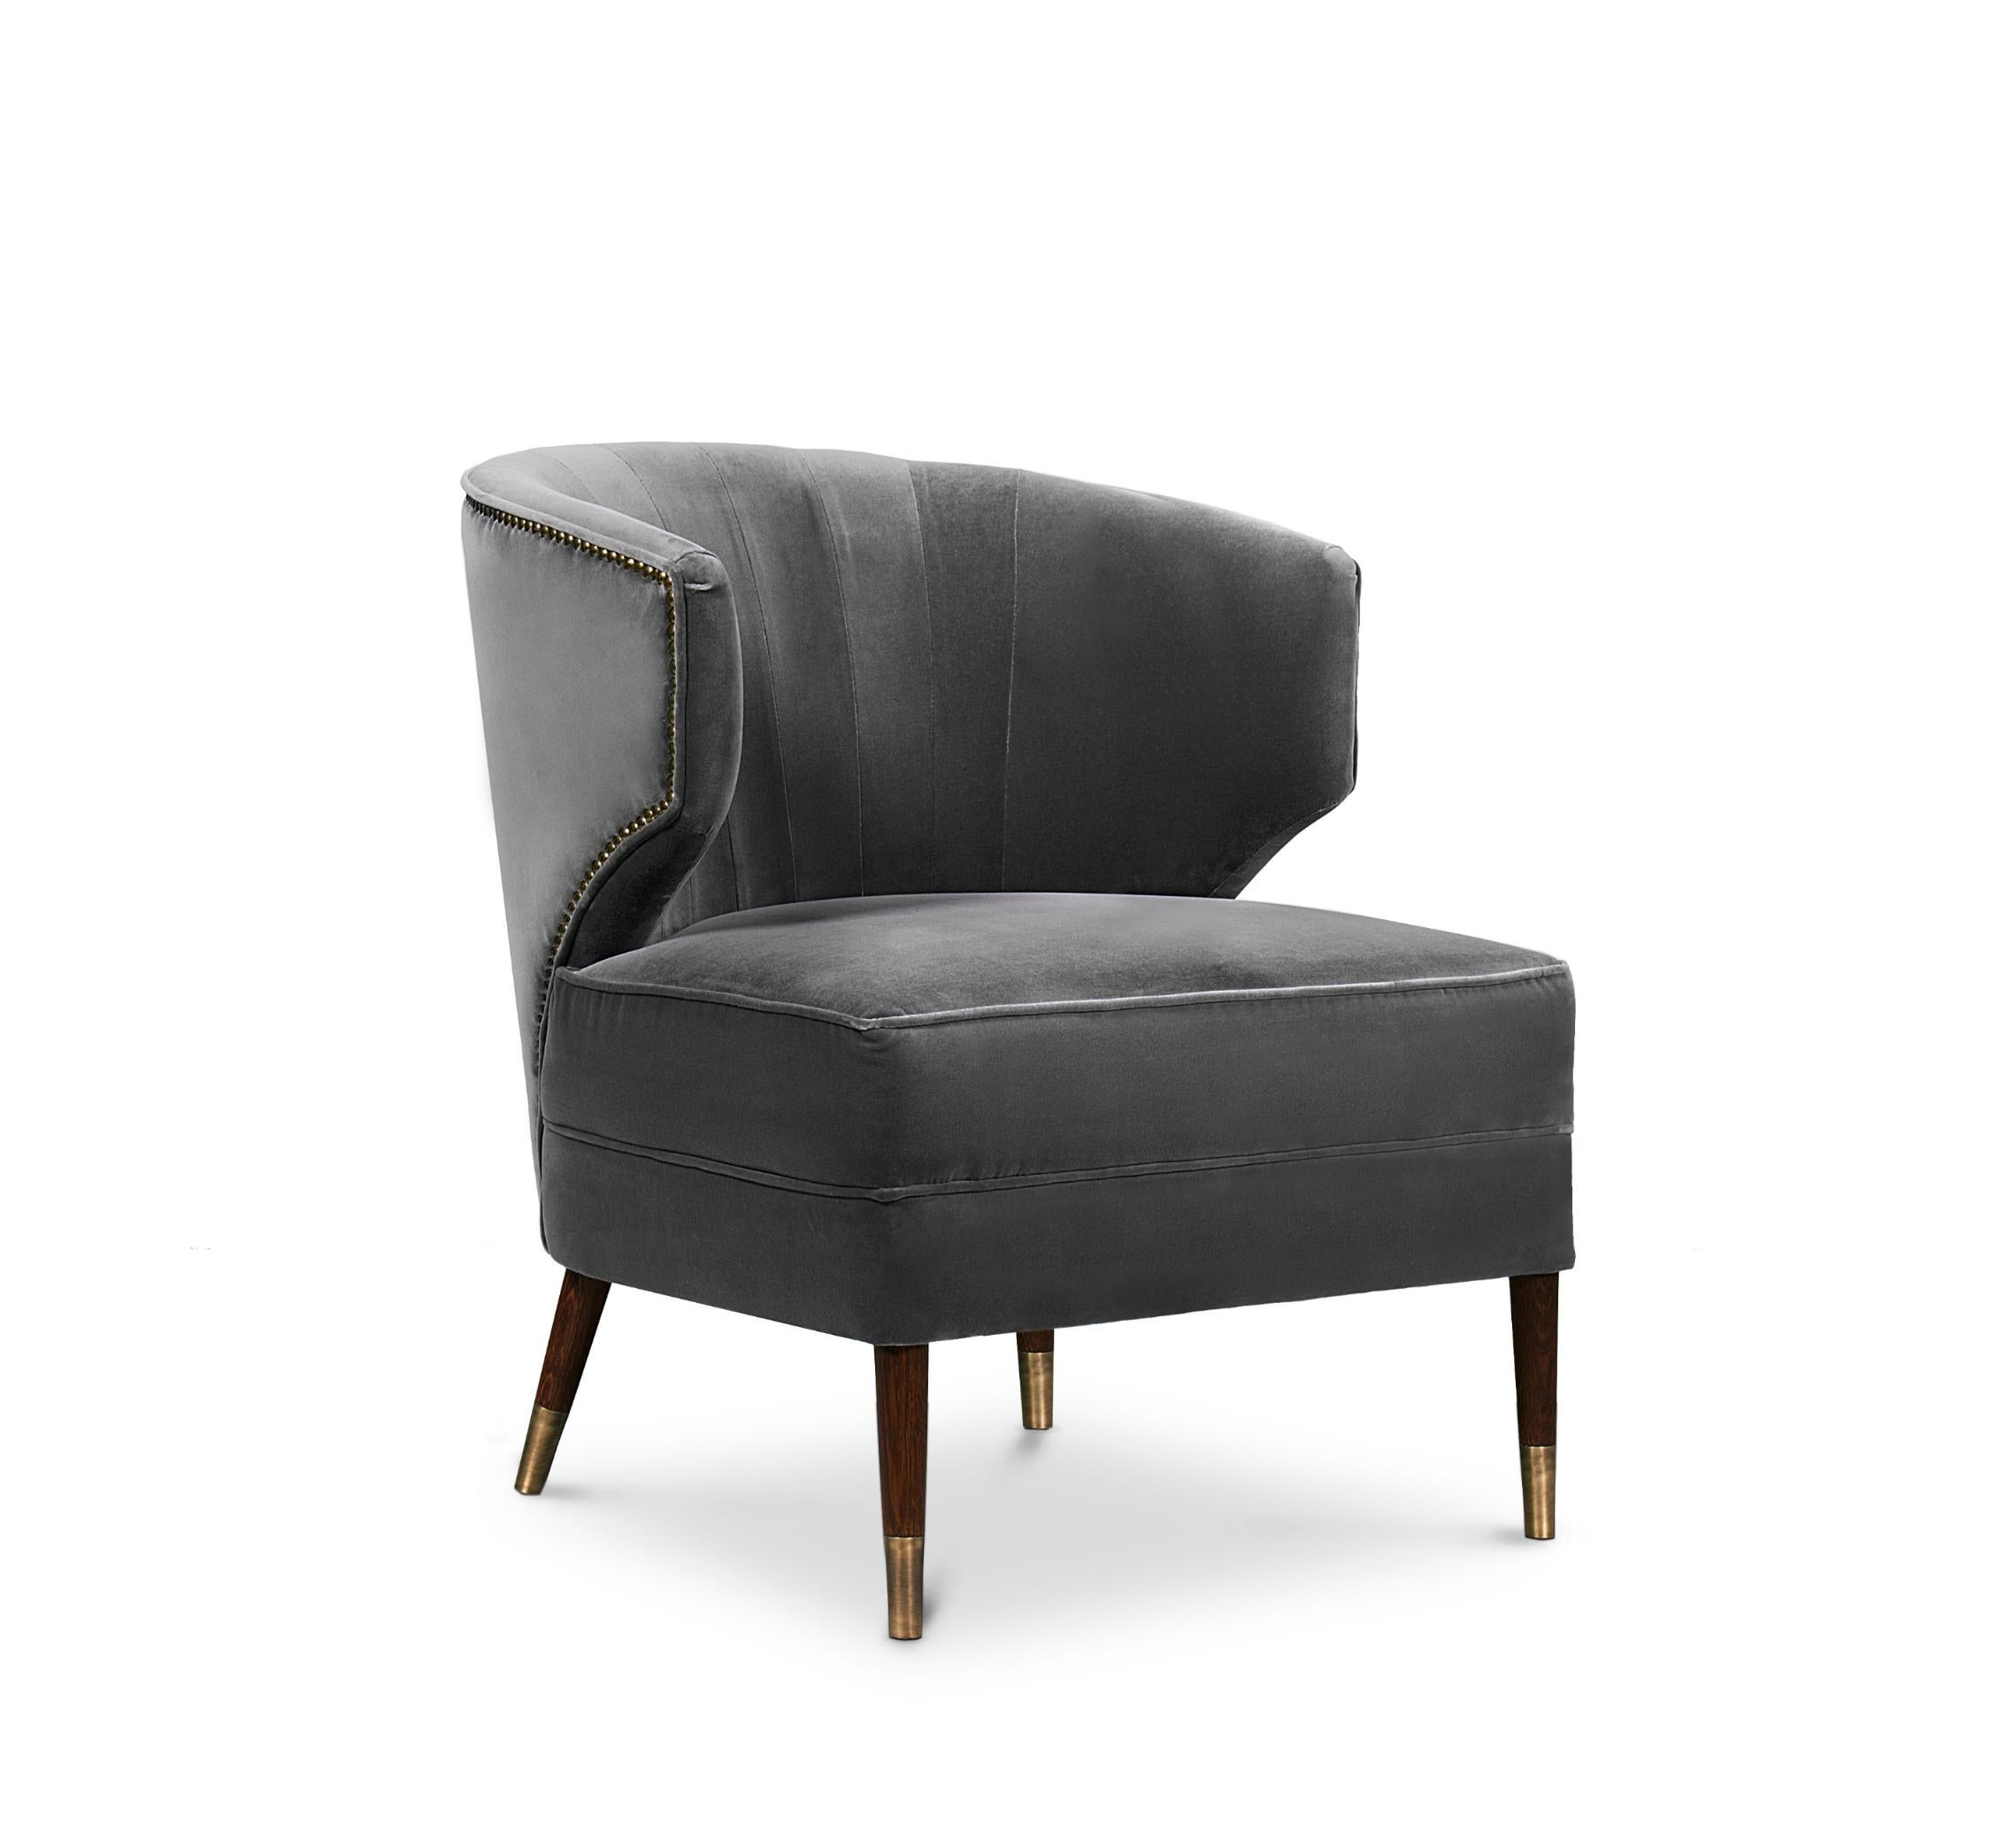 Portuguese Ibis Armchair in Cotton Velvet with Brass Details For Sale